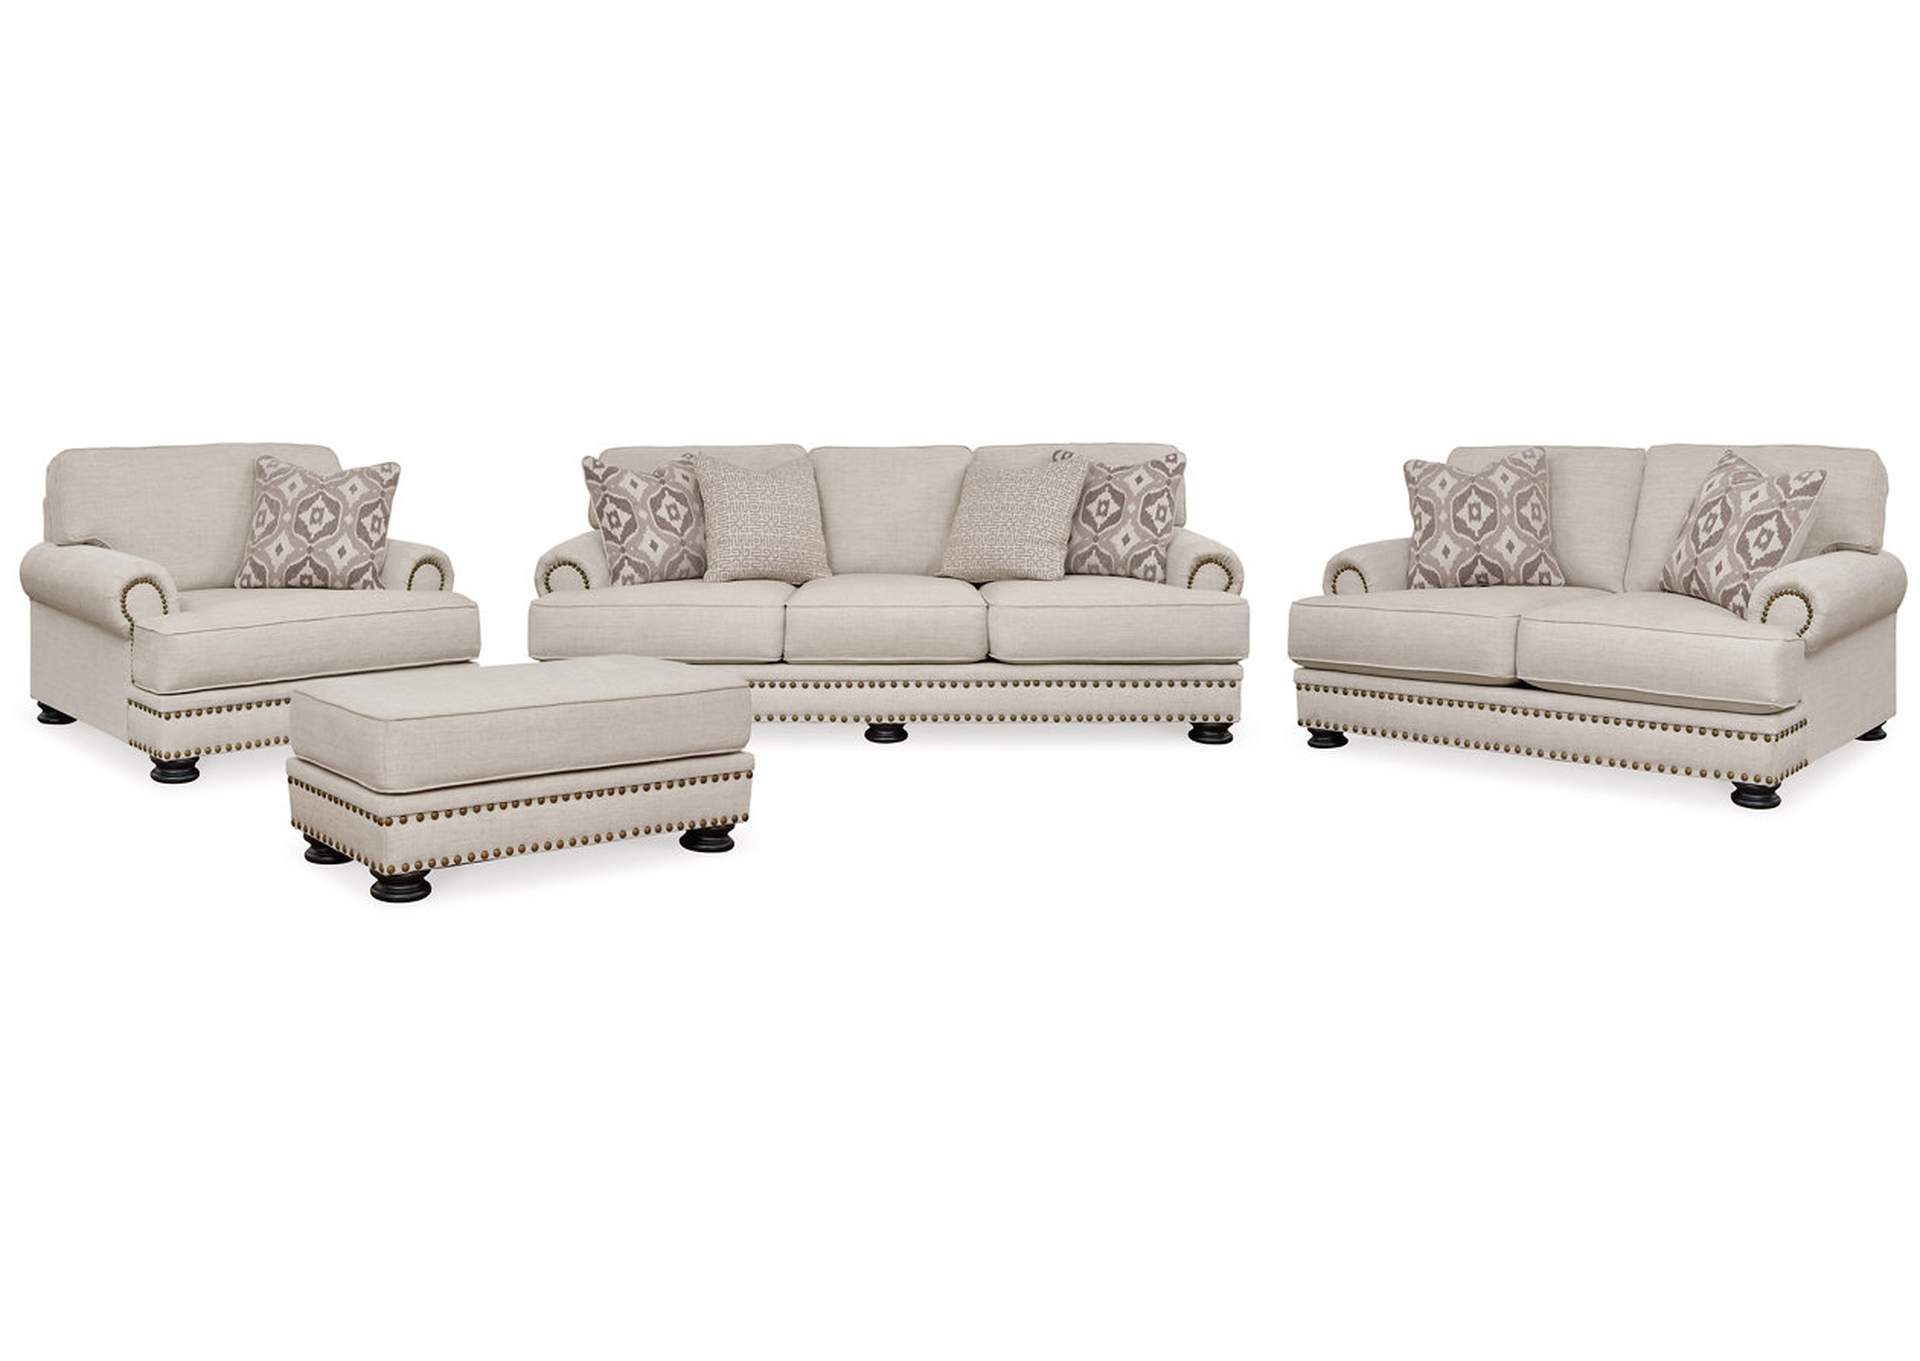 Merrimore Sofa, Loveseat, Oversized Chair and Ottoman,Benchcraft